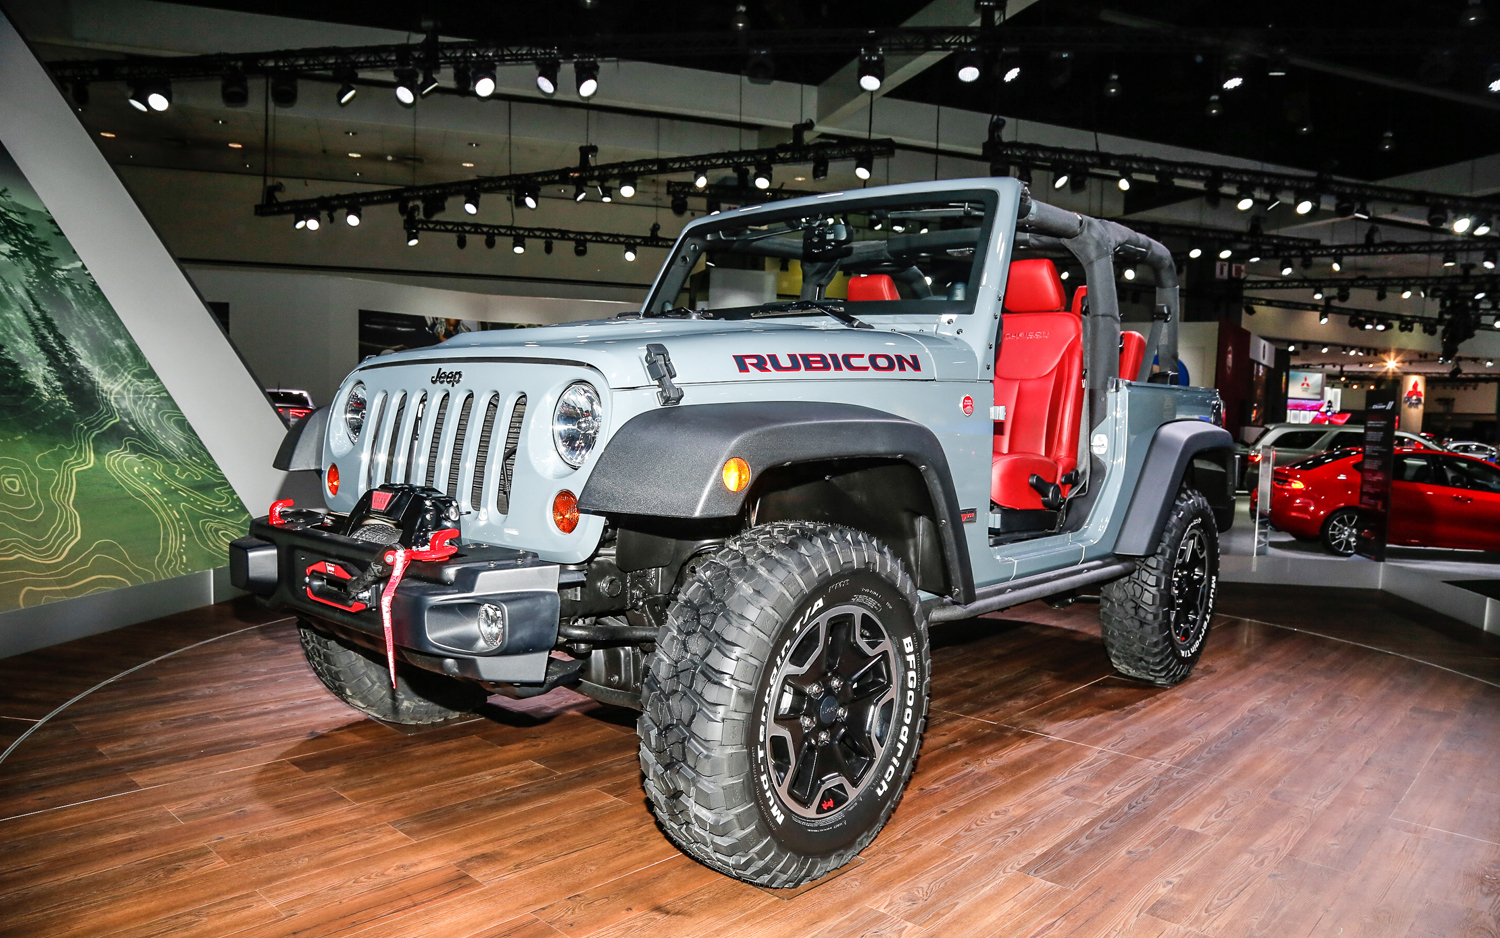 2013 Jeep rubicon pictures #5